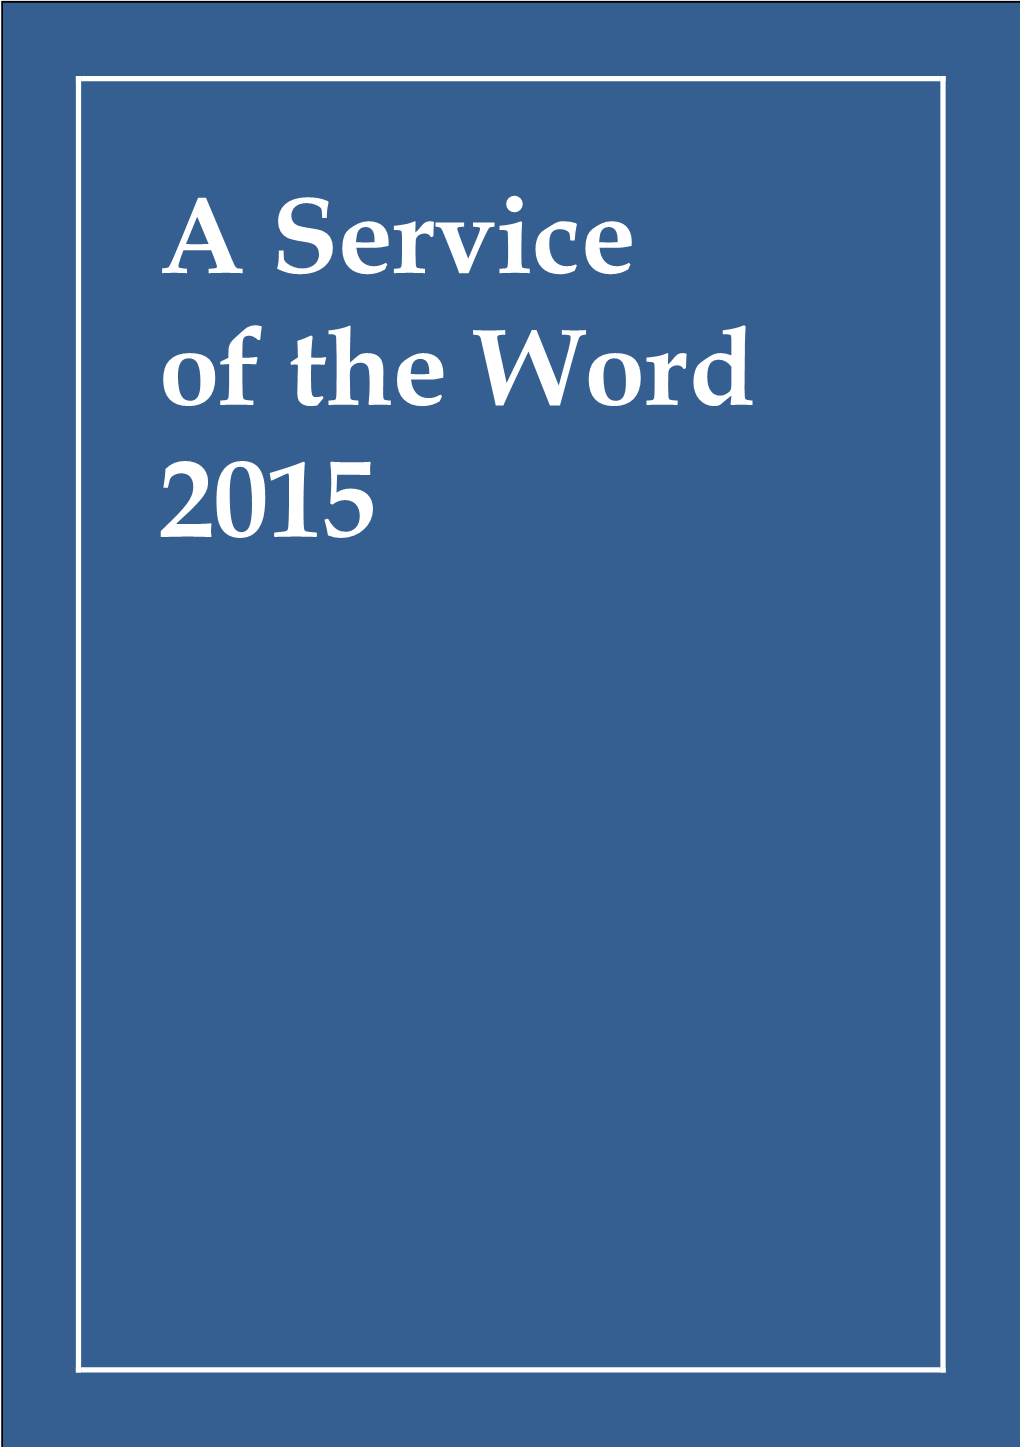 A Service of the Word 2015